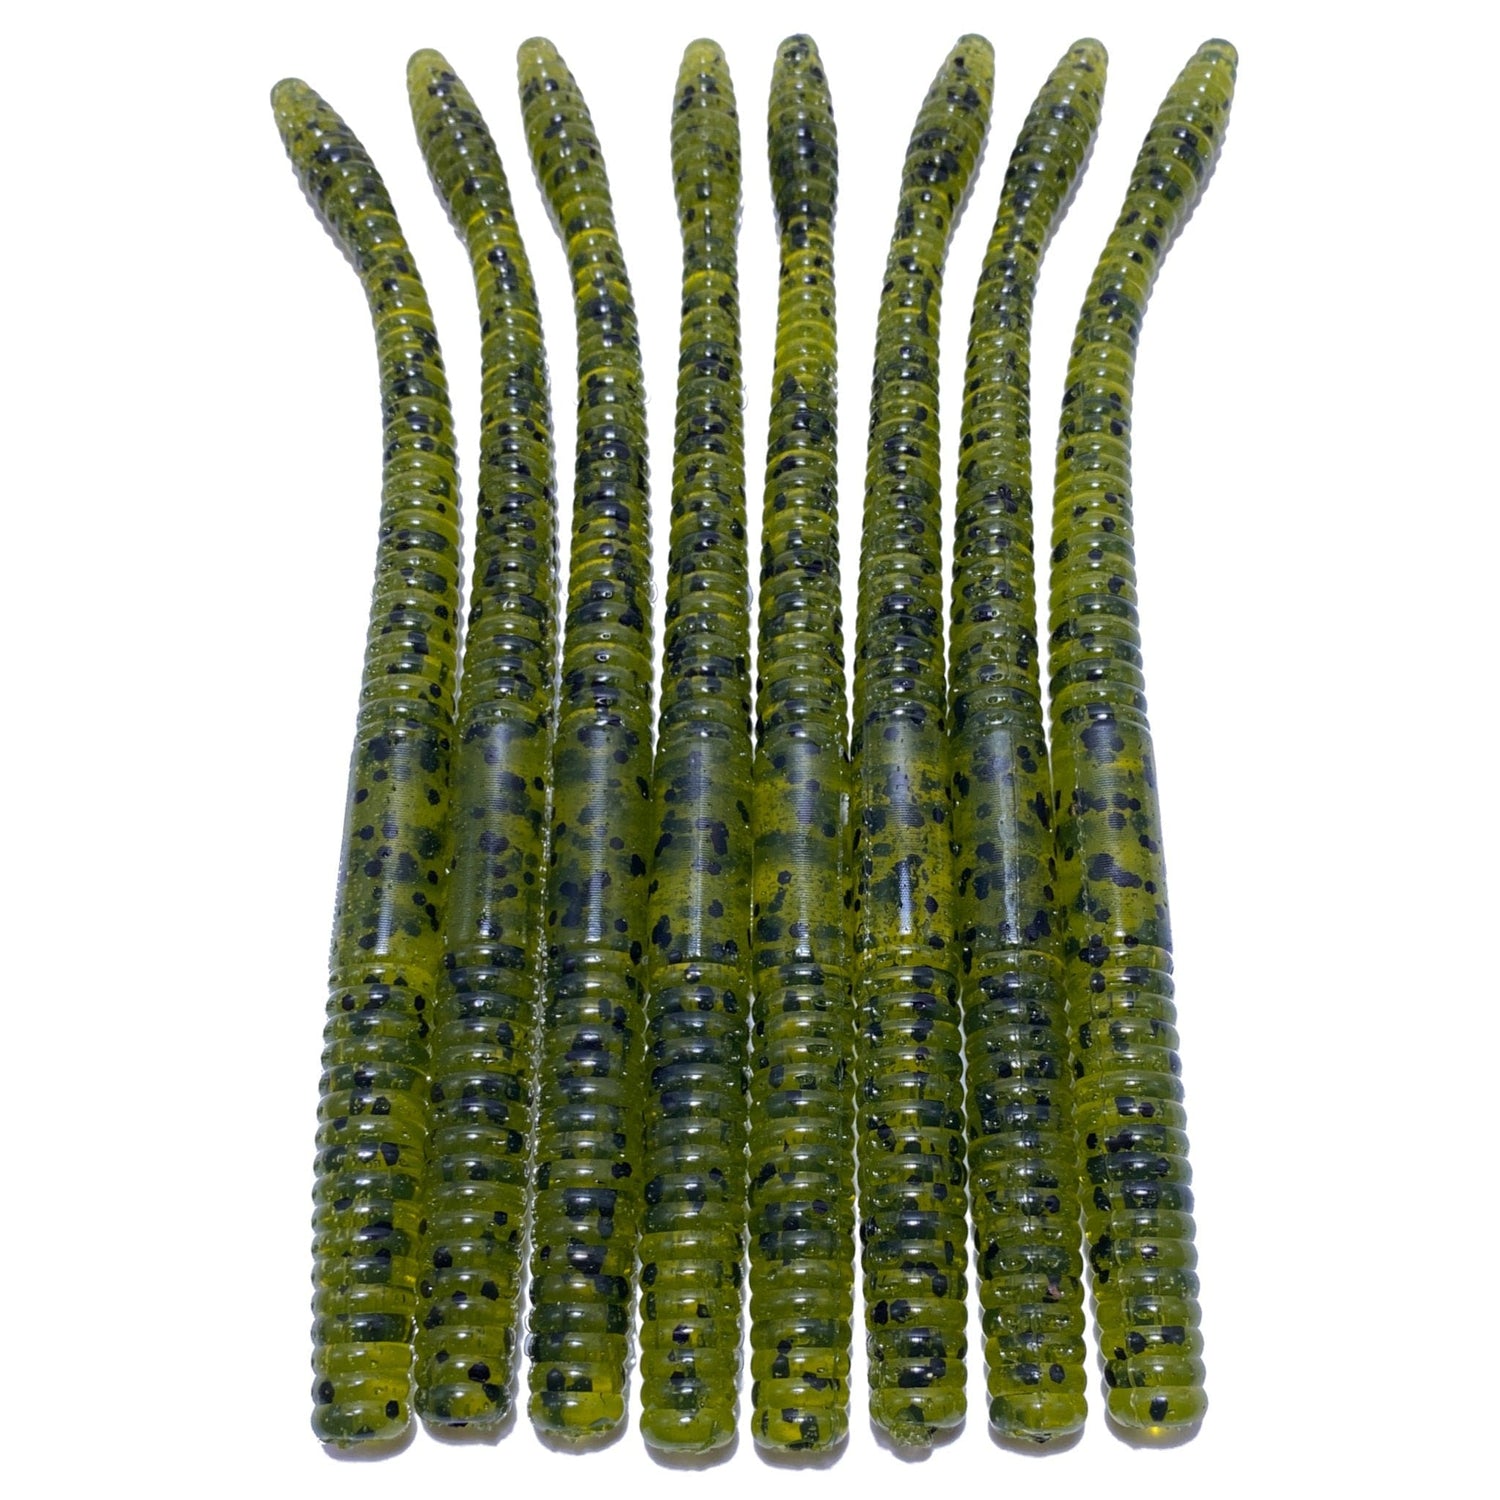 Obee Finesse Worm - Watermelon Seed - Obee Fishing Co.